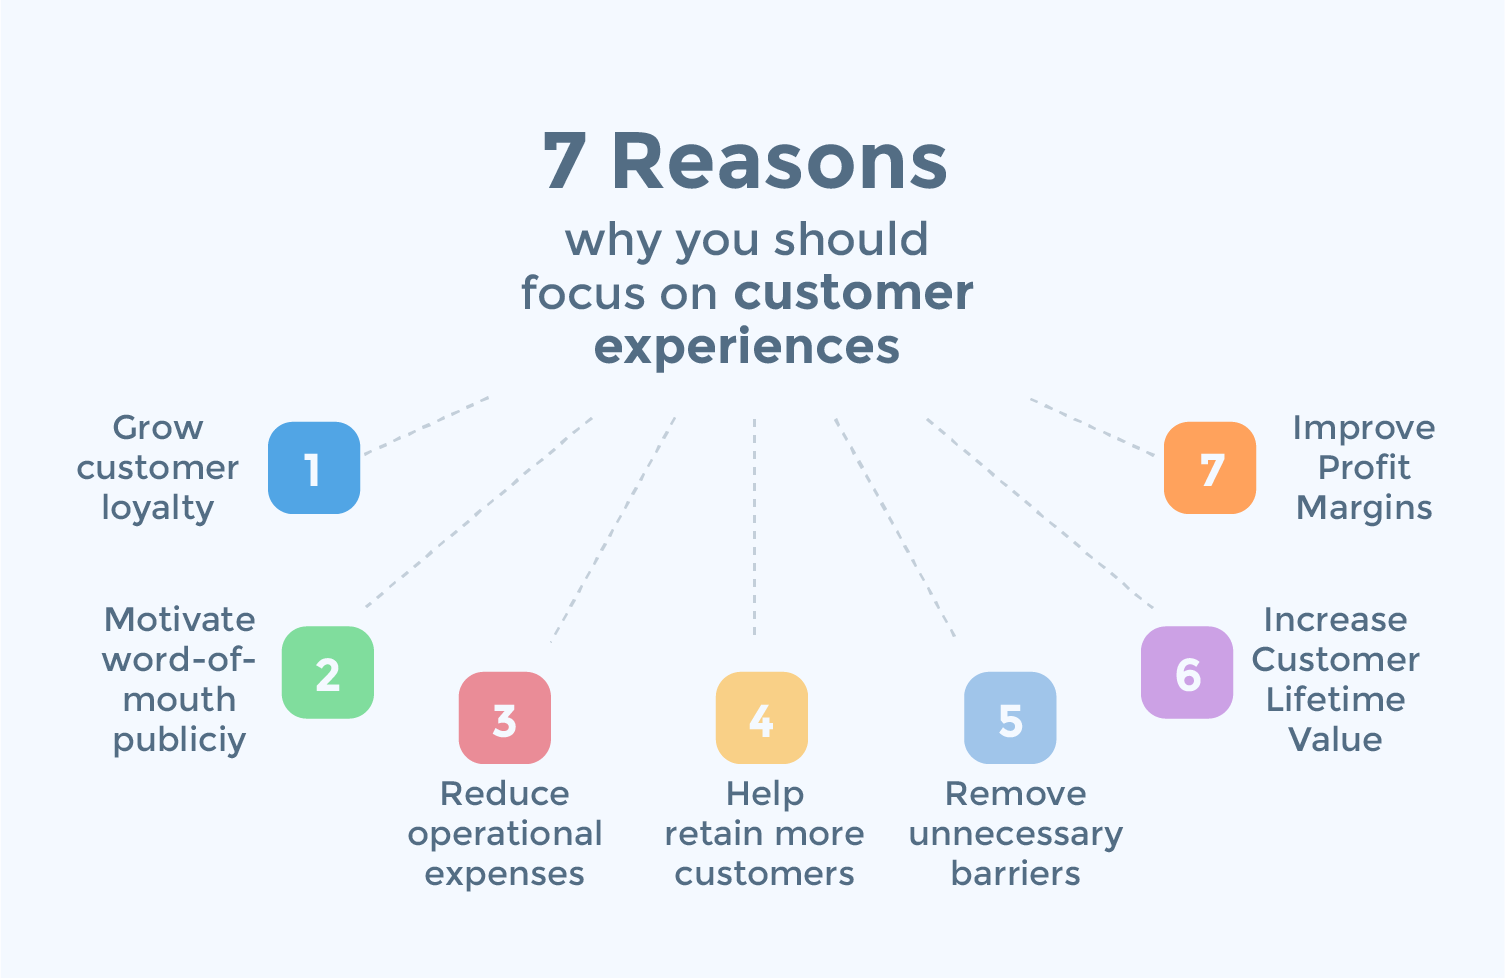 7 reasons why you should focus on customer experience.